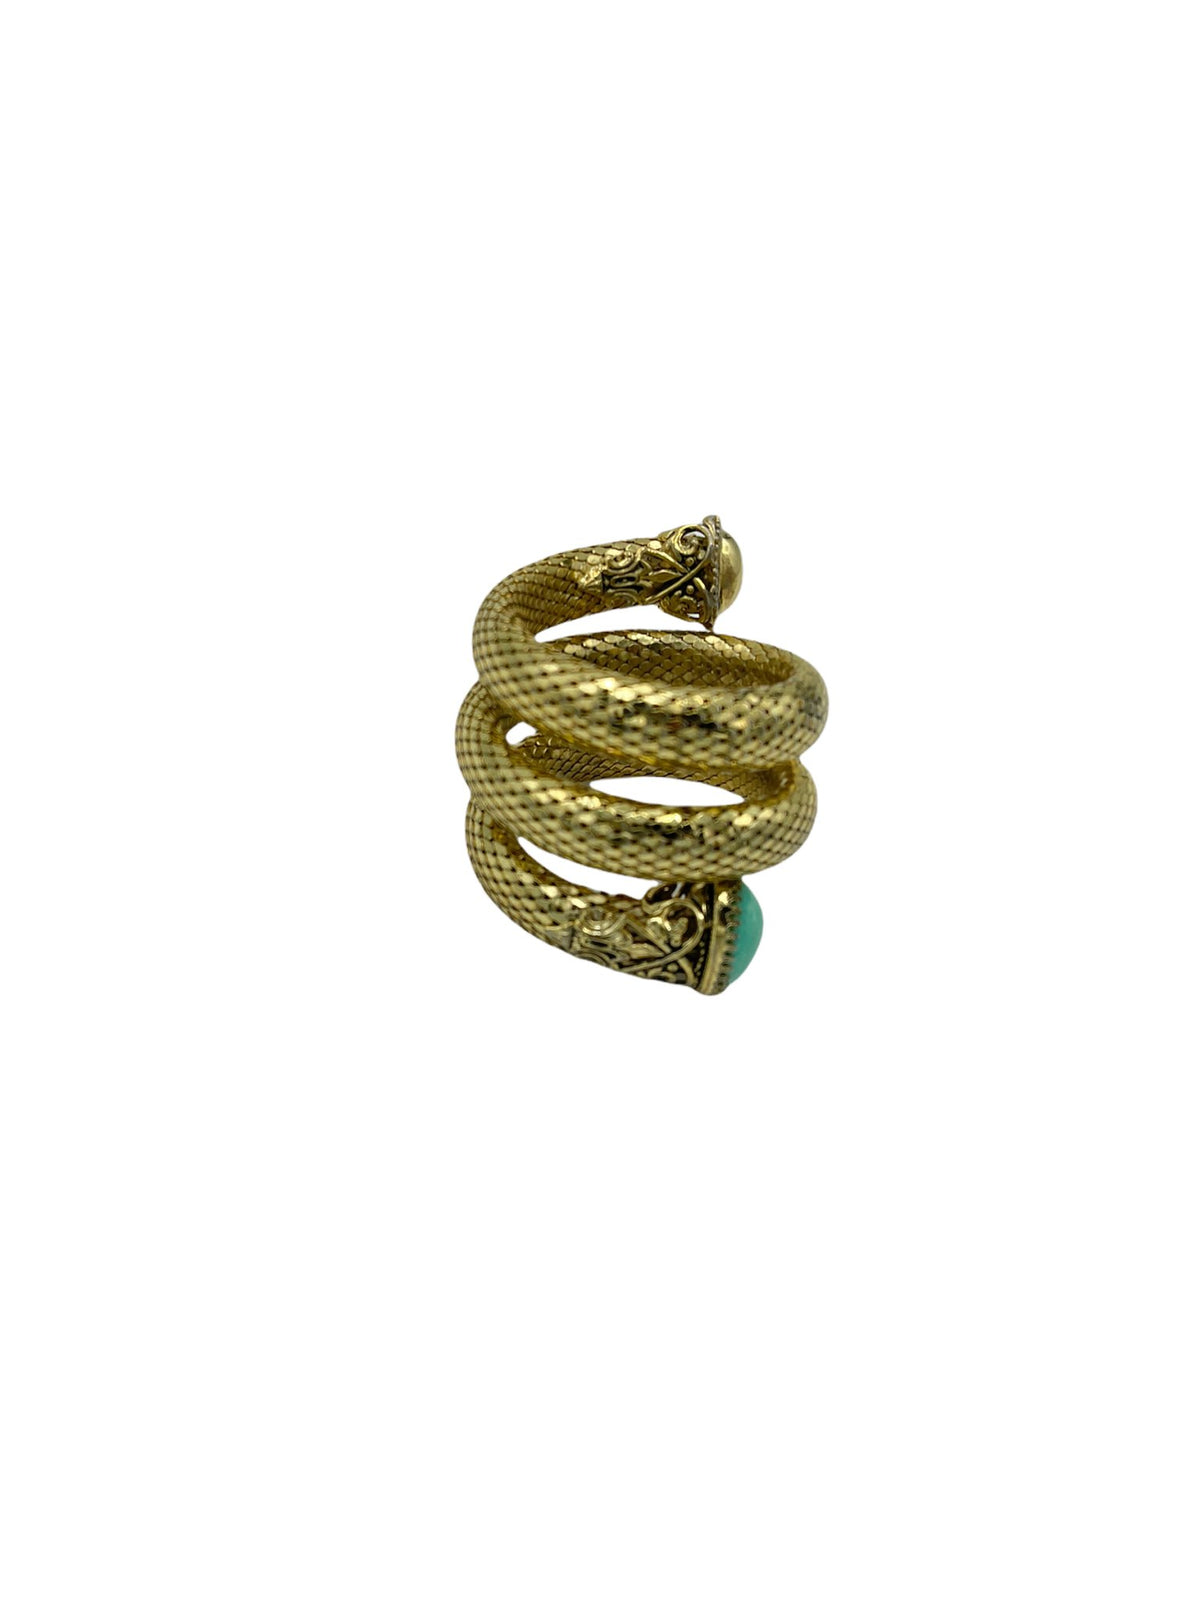 Whiting & Davis Gold Mesh Coiled Snake Green Cabochon Vintage Bracelet - 24 Wishes Vintage Jewelry